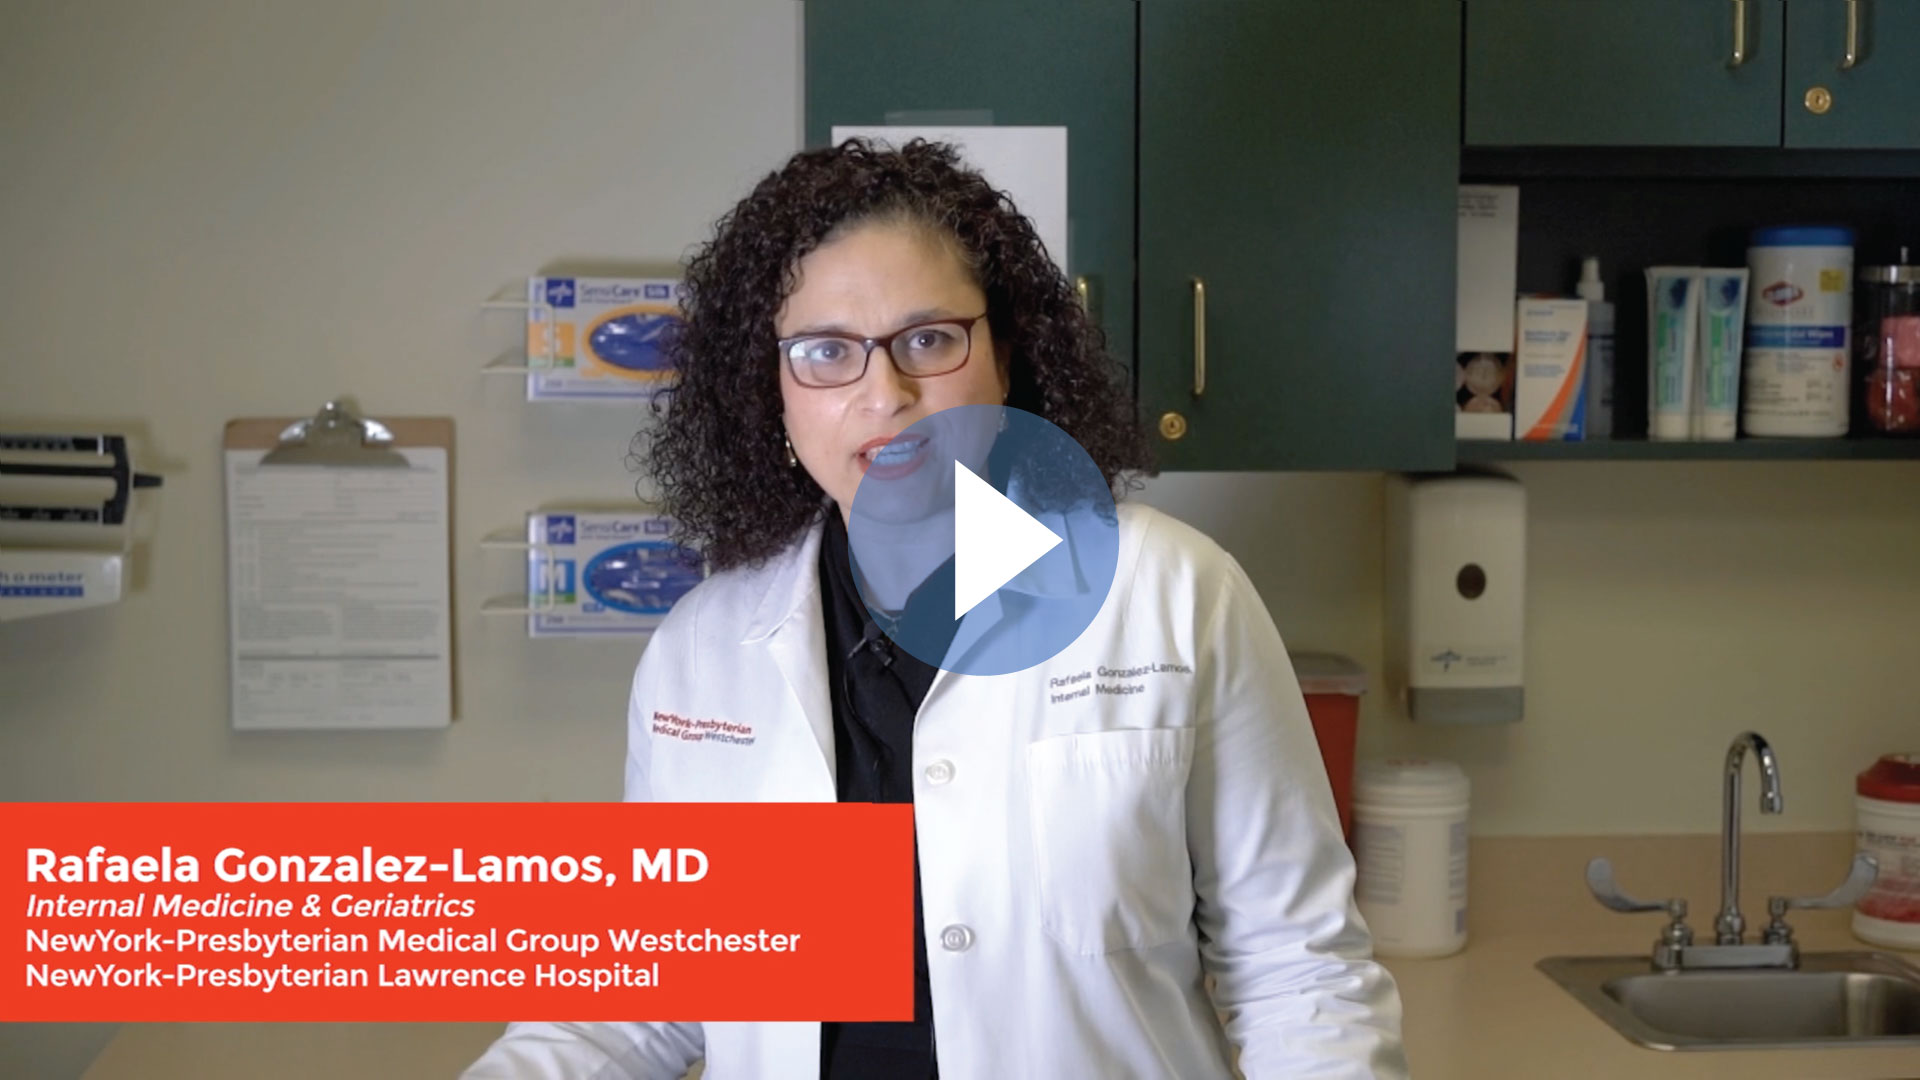 Hear from NewYork Presbyterian Physician Dr. Gonzalez-Lamos about why you should get the COVID-19 Vaccine.